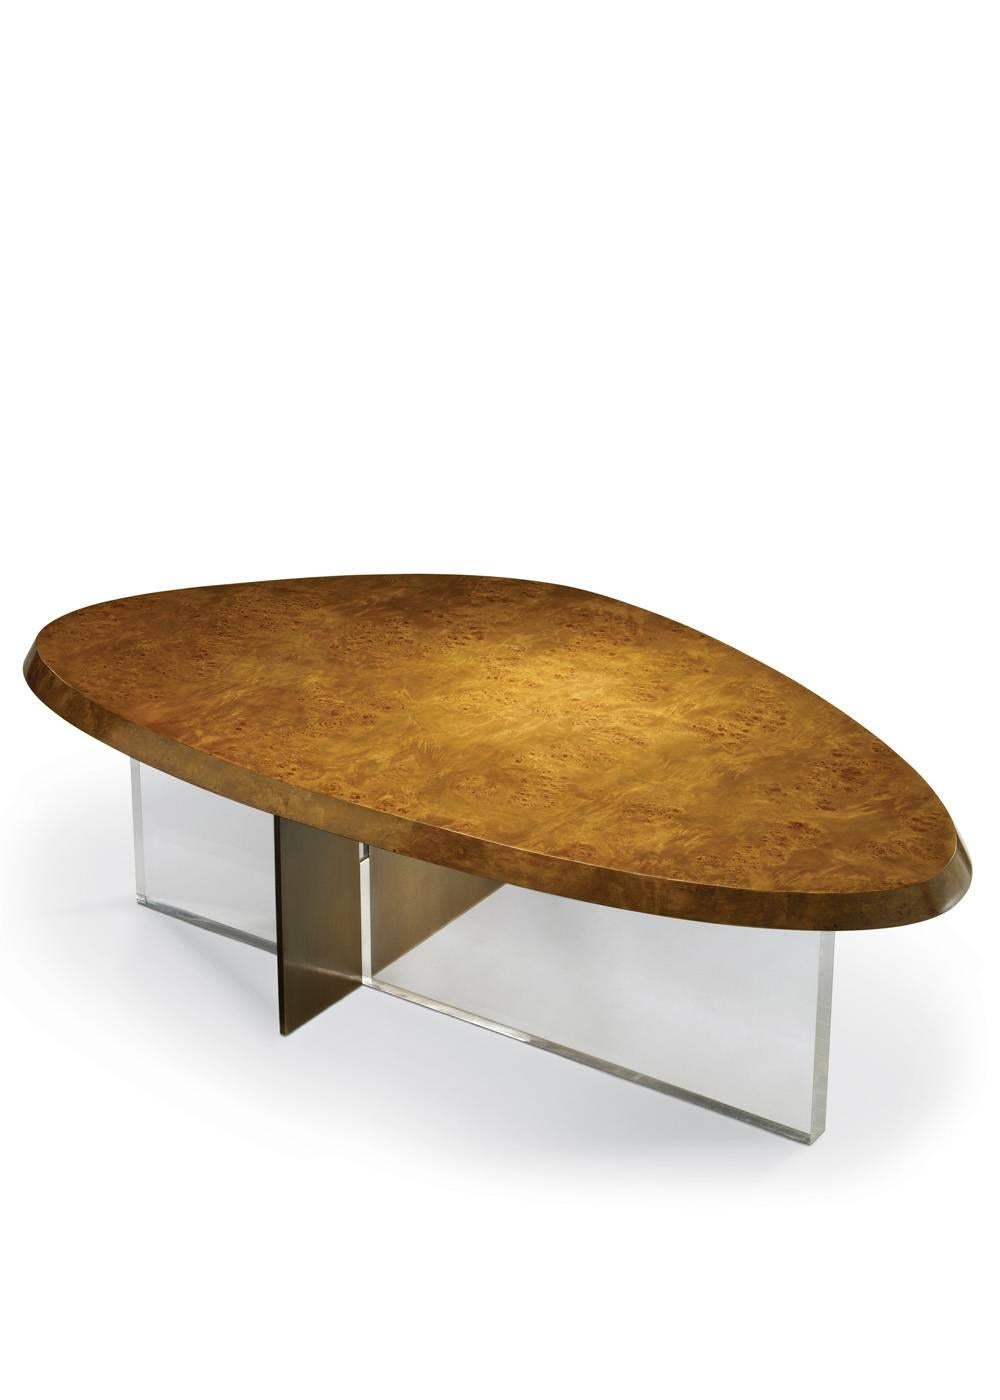 A beautifully crafted coffee table in a contemporary modern design made from mappa burl medium tone wood veneered top raised on a bronze patinated metal plate joined with a 1 1/2